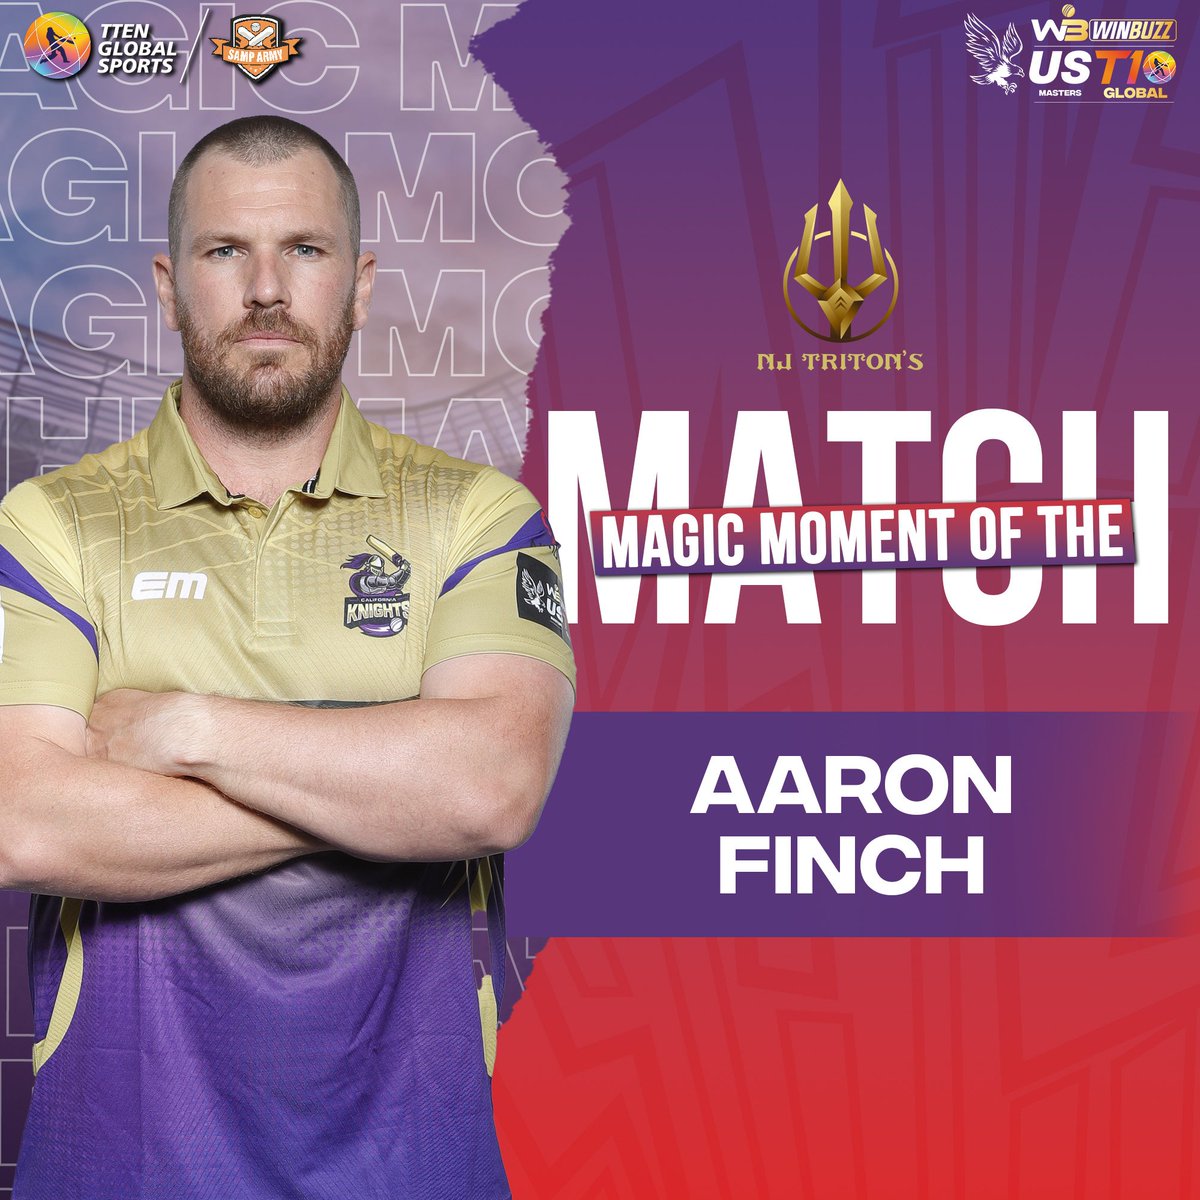 Match 2 ⏭️ New Jersey Triton’s vs California Knights 

Magic Moment of the Match award goes to Aaron Finch for his 5️⃣ sixes in an over 🪄🔥

#NJTvCK #USMastersT10 #SunshineStarsSixes #CricketsFastestFormat #T10League